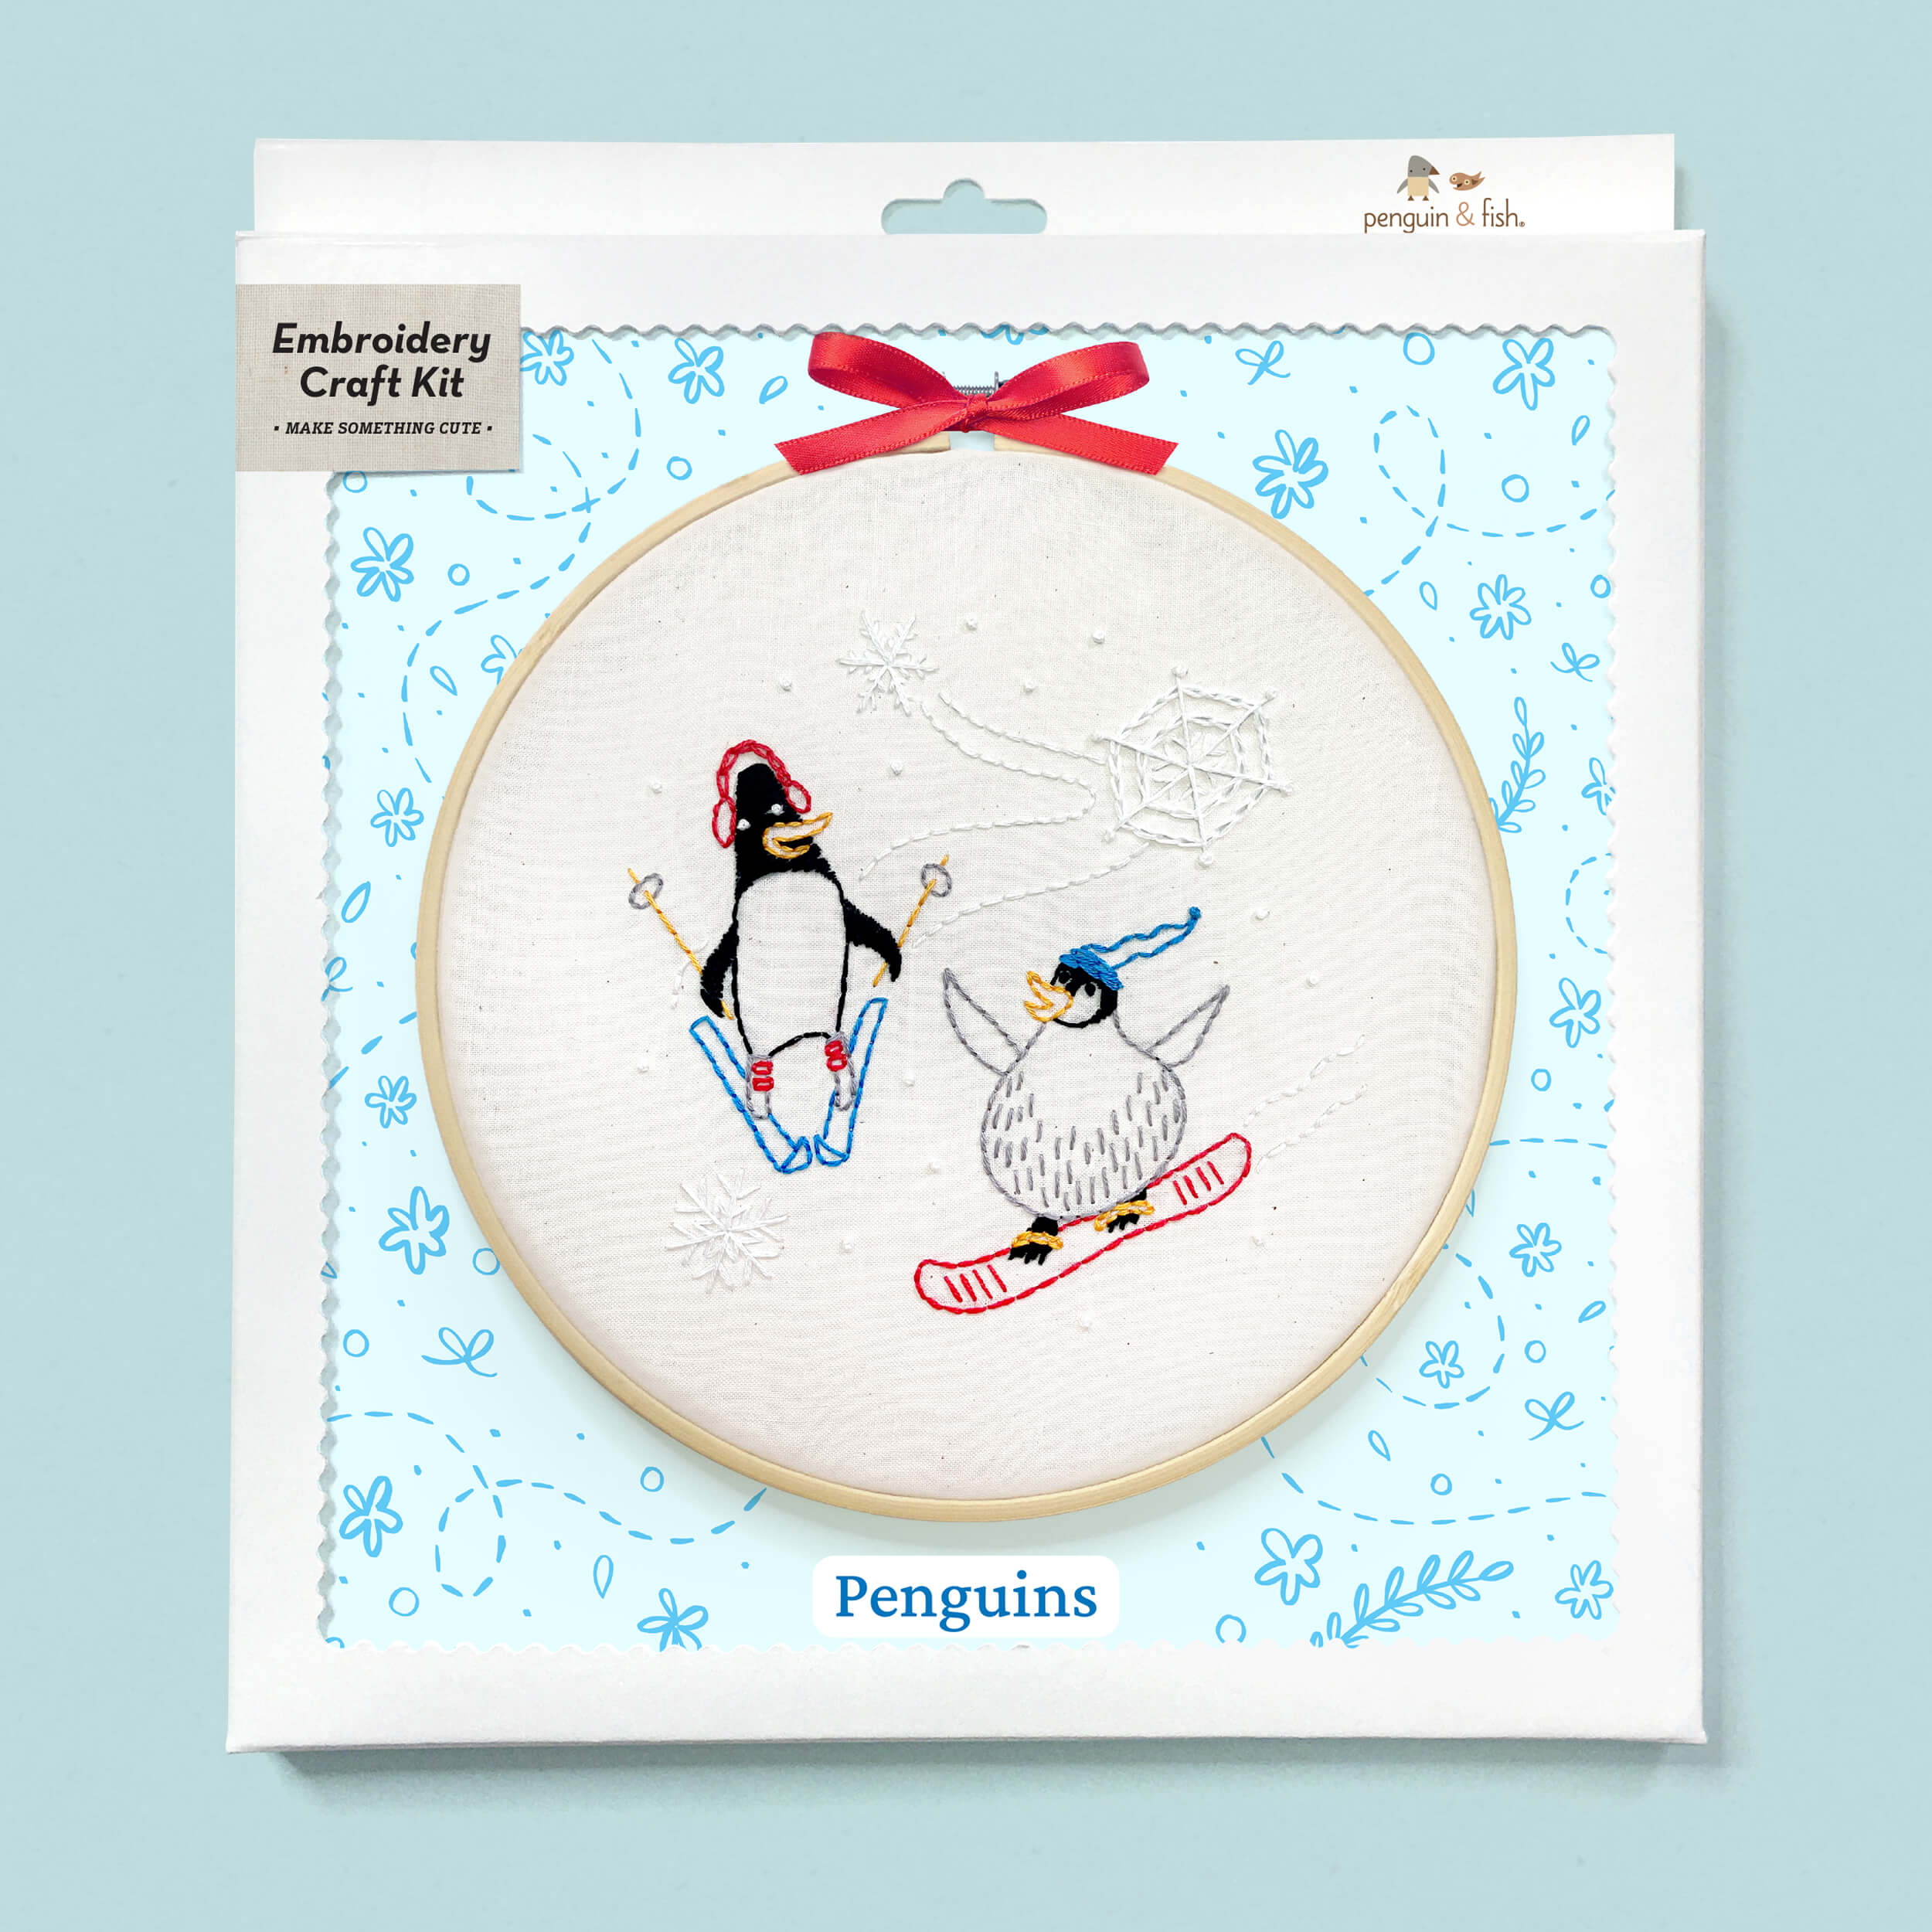 Penguins embroidery kit in a box